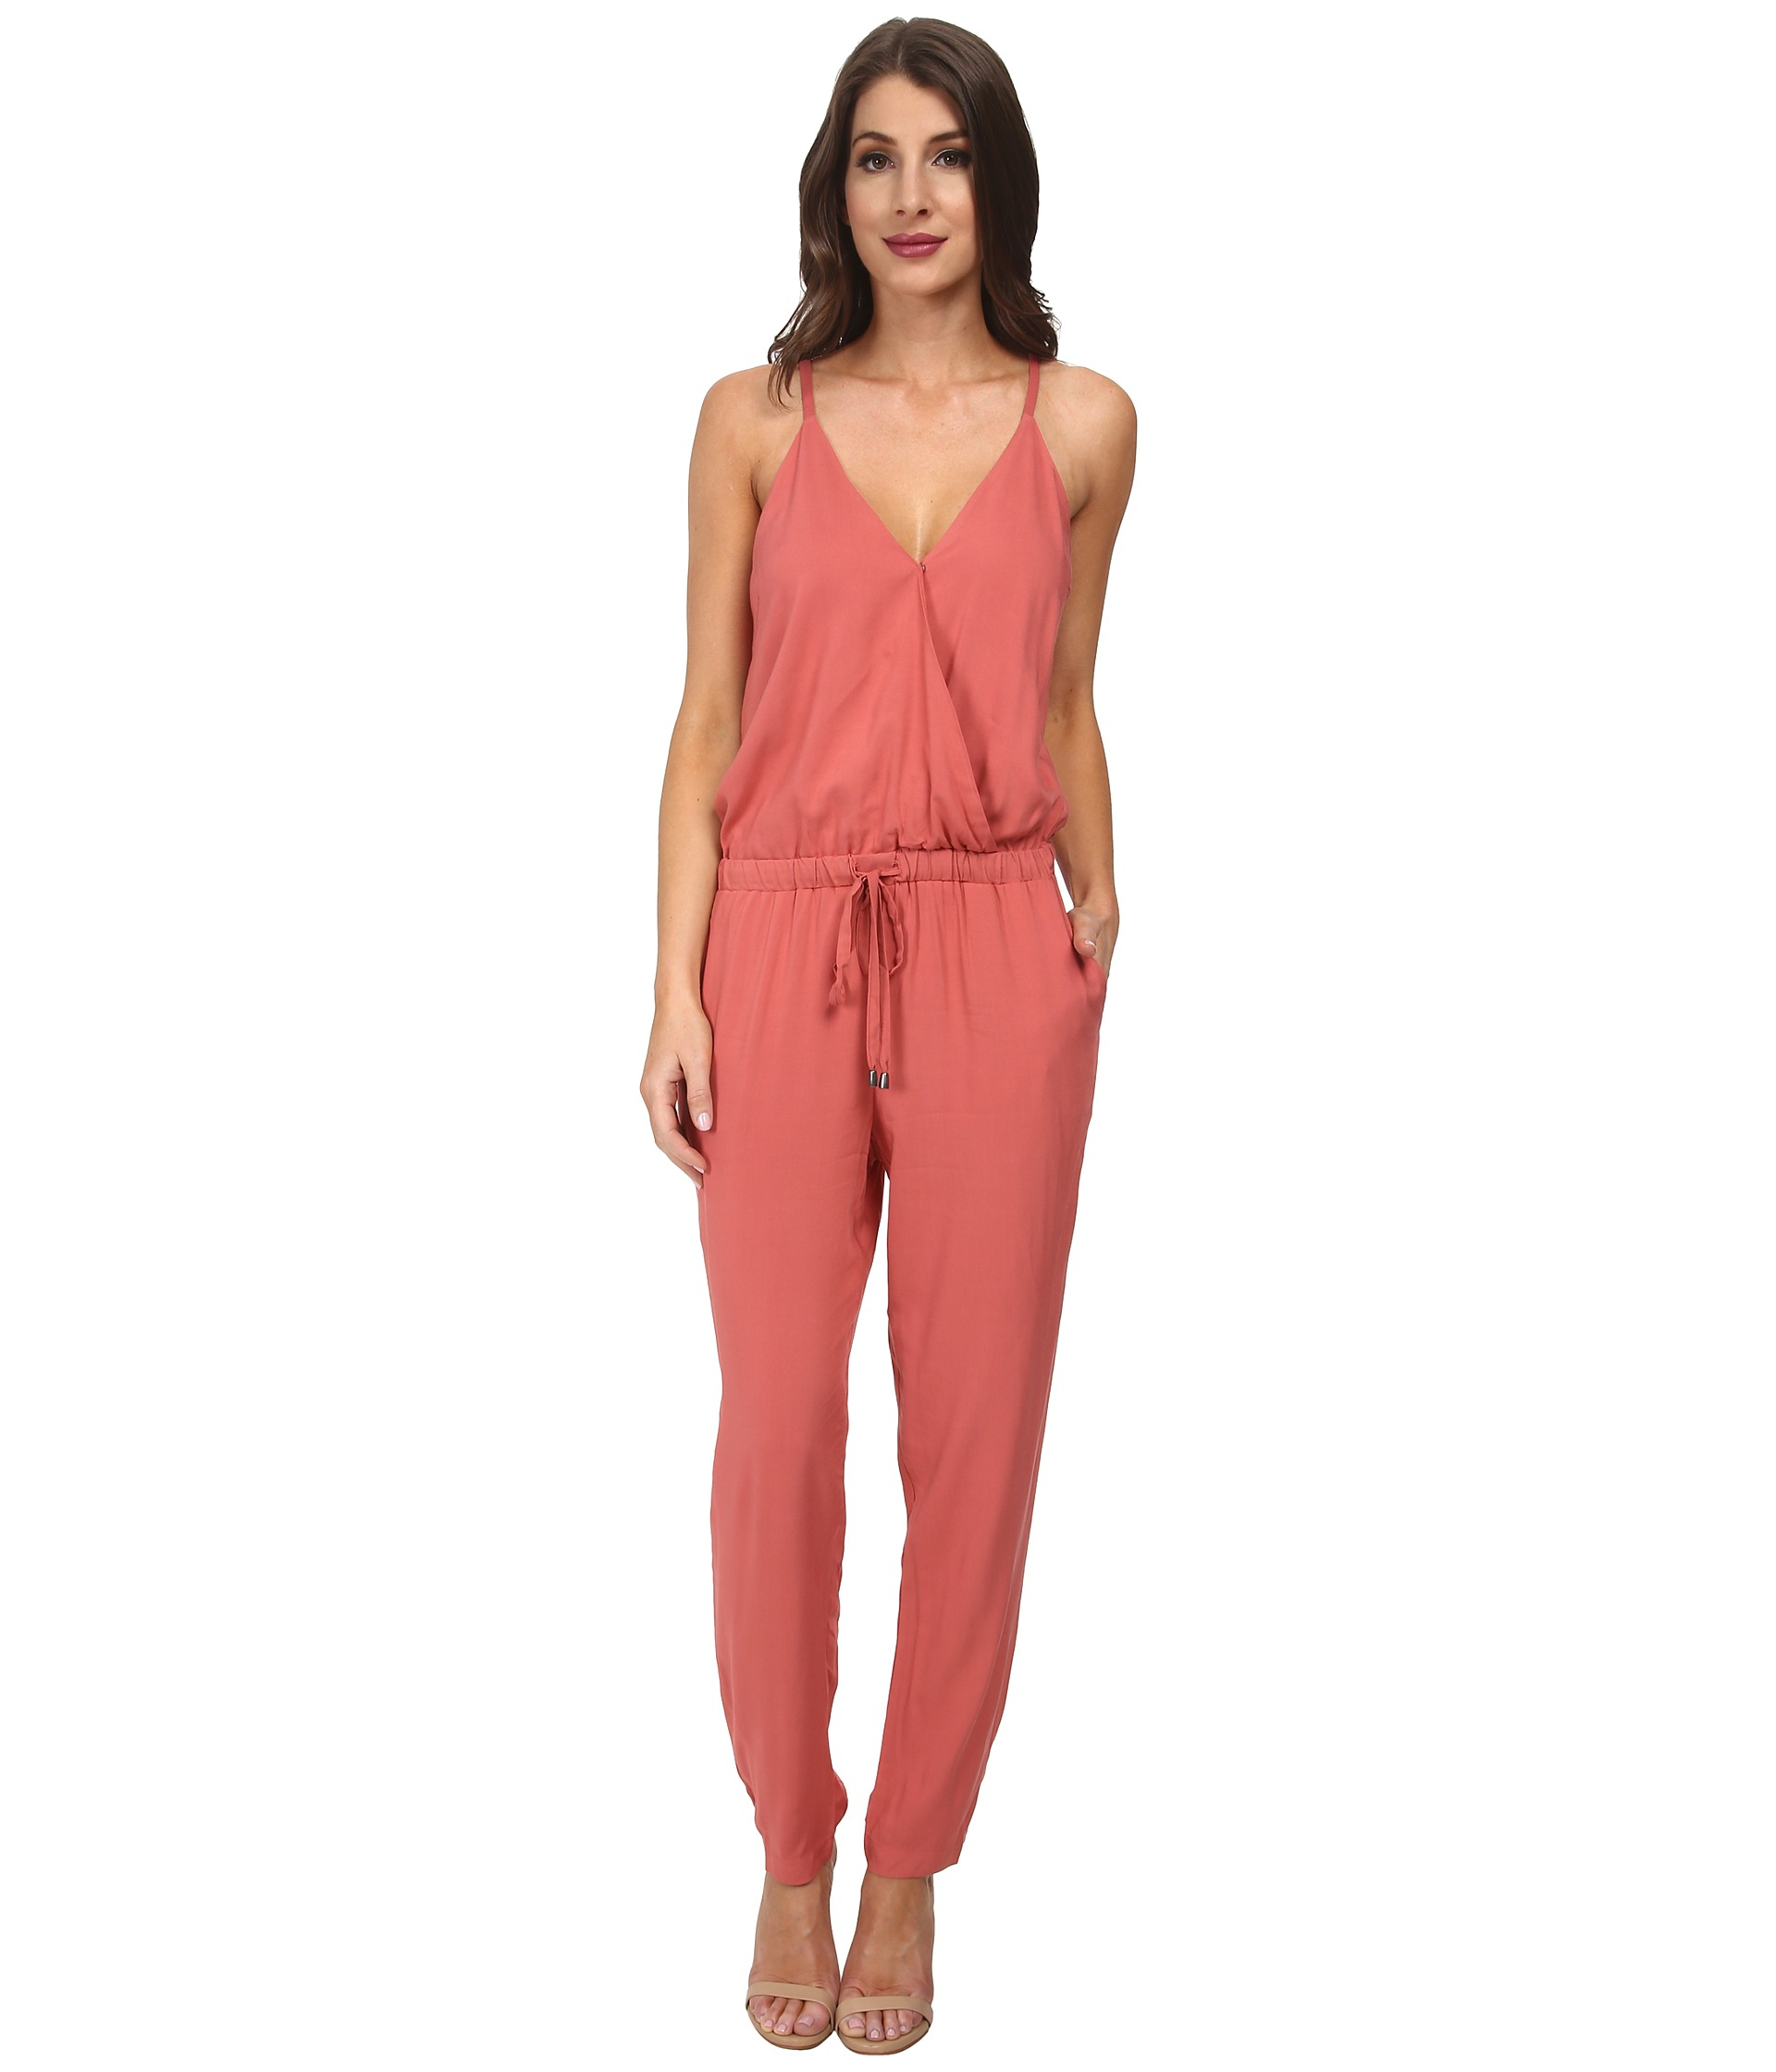 Lyst - Splendid Rayon Voile Crossover Jumpsuit in Brown